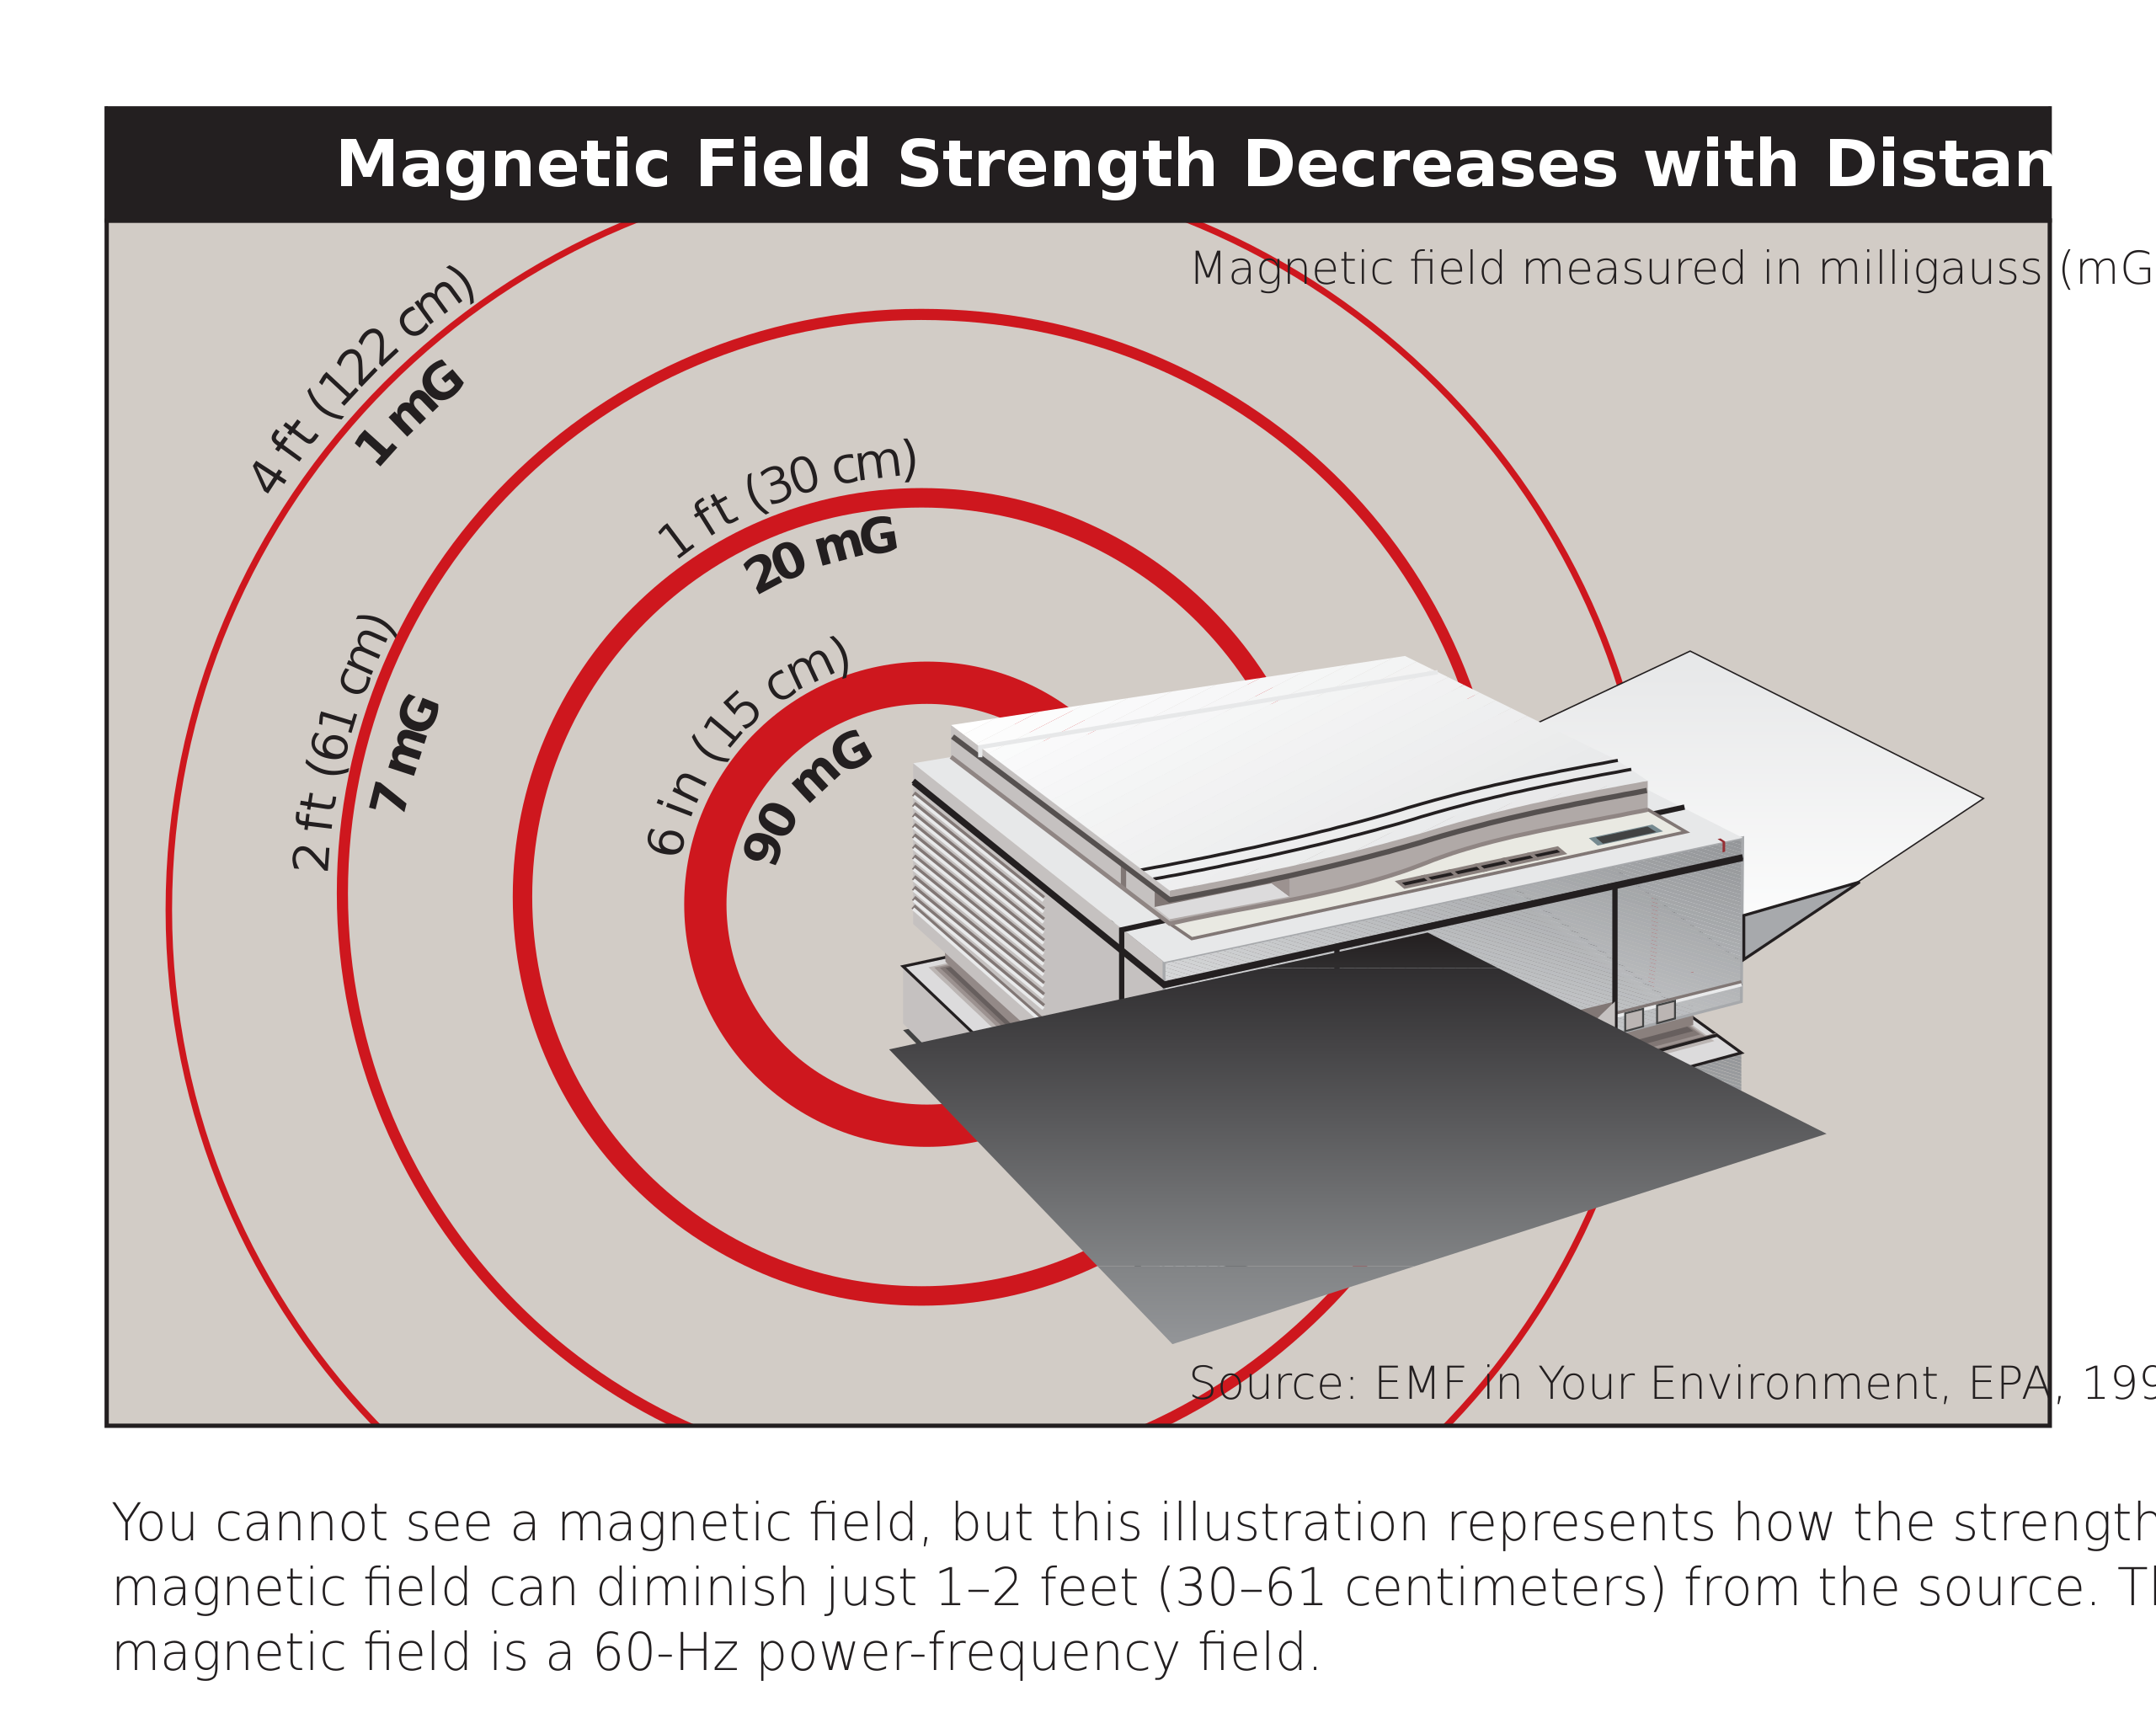 Print Shah diamant File:Magnetic Field Strength Decreases with Distance.svg - Wikimedia Commons